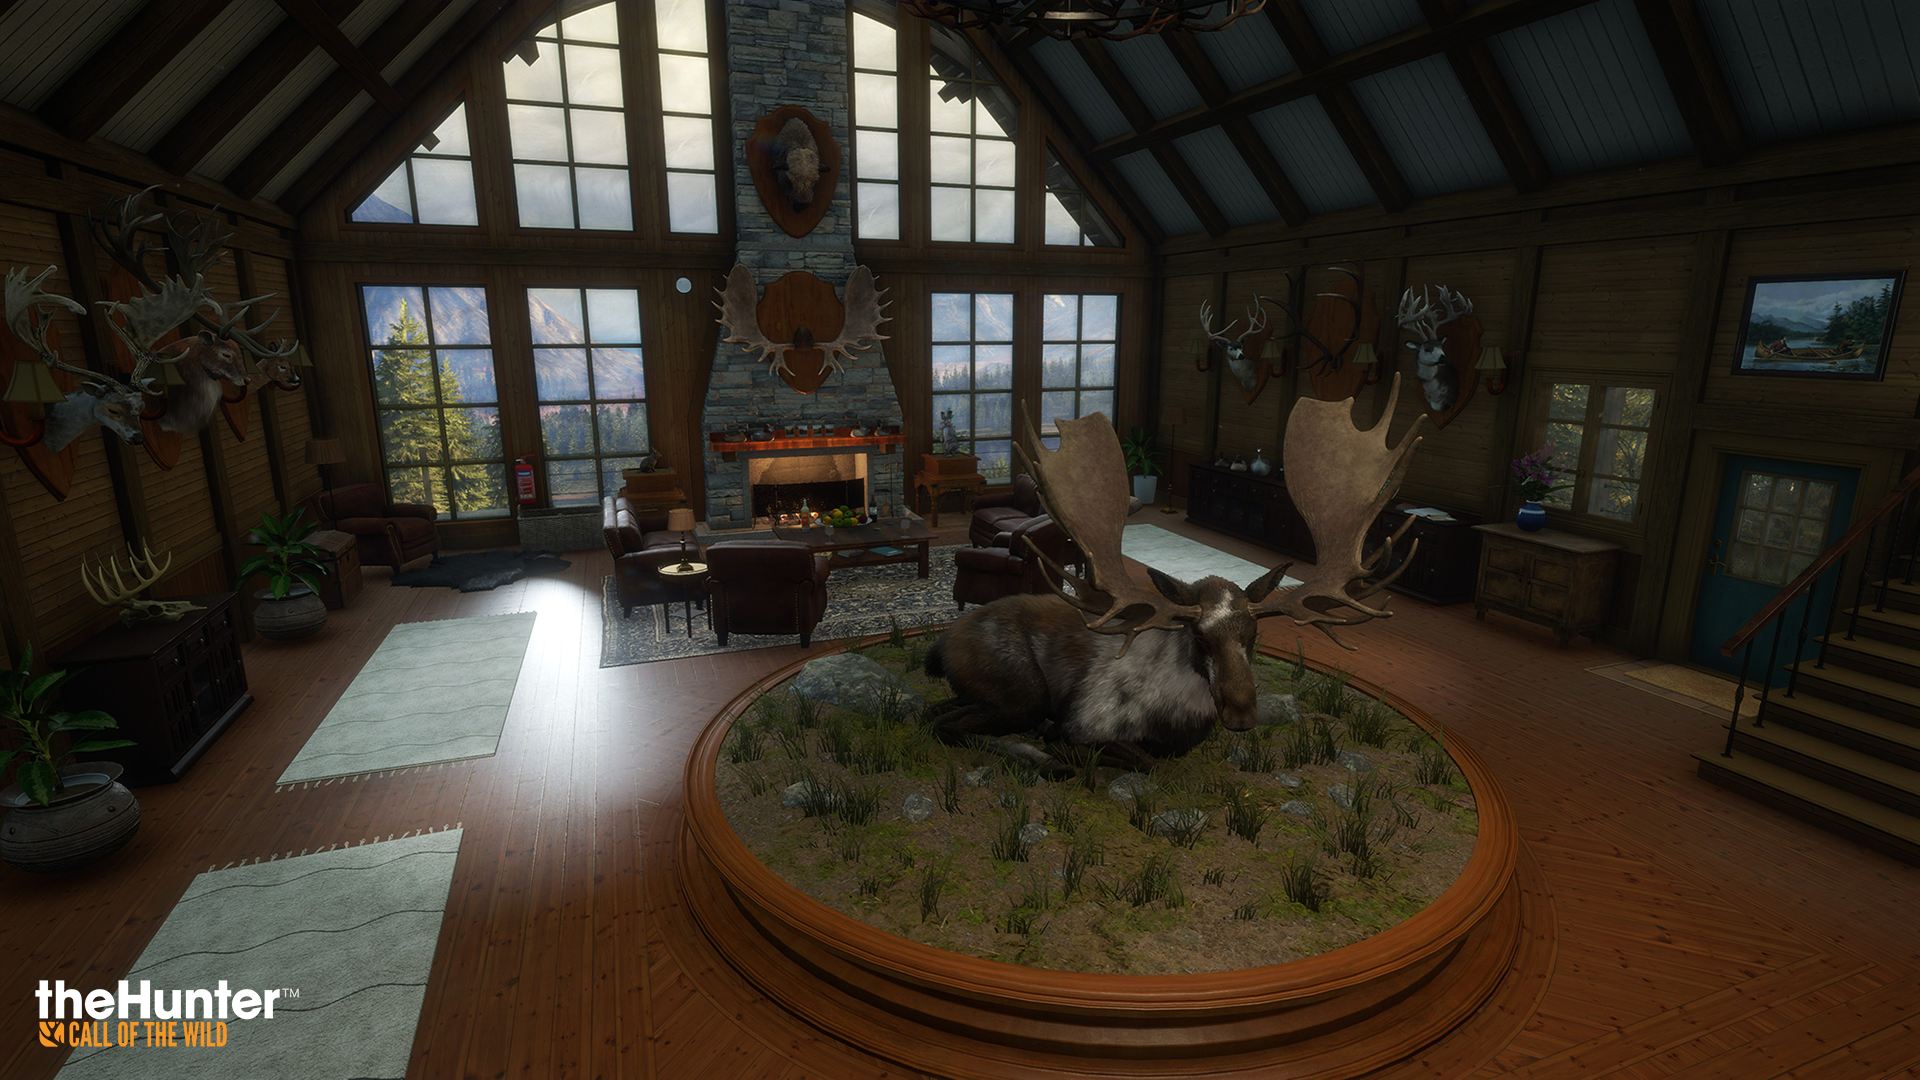 A screenshot of the Tree Trophy Cabin main room interior.